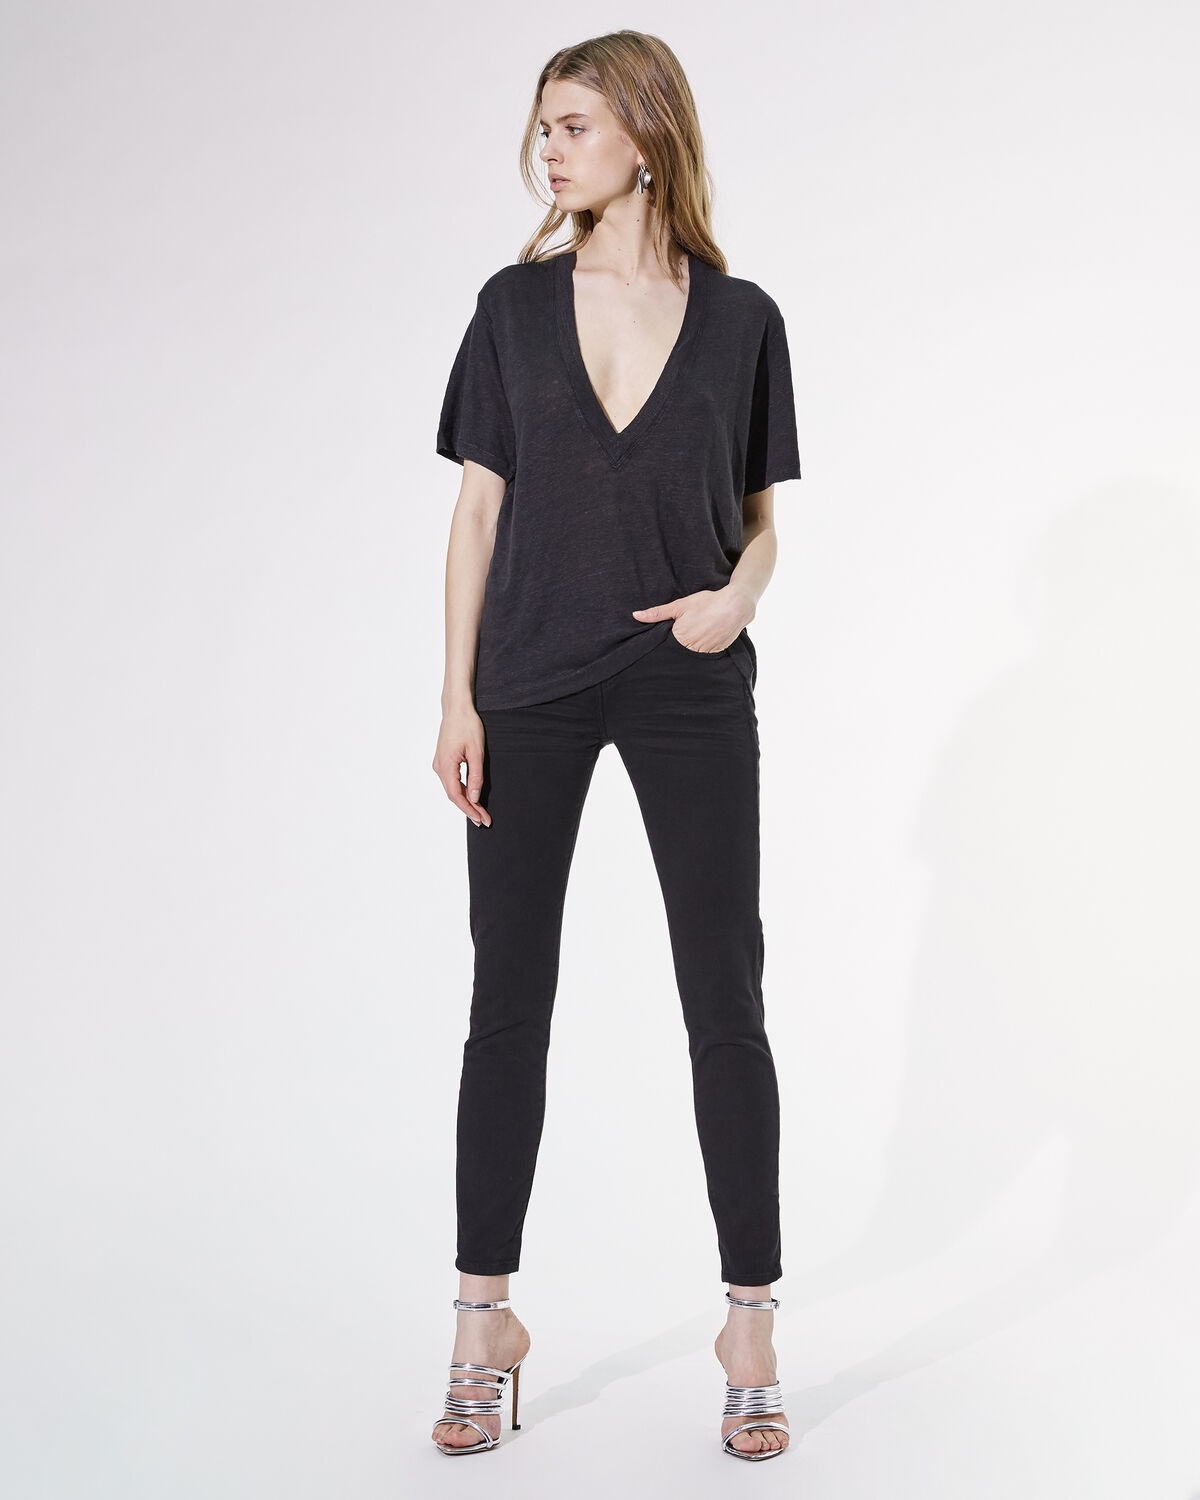 Photo of IRO Paris Jahal T-Shirt Black - This Linen T-shirt With Short Sleeves And A Slit V Neckline Is An Essential Part Of Any Female Wardrobe. It Will Be Worn For All Occasions. Spring Summer 19